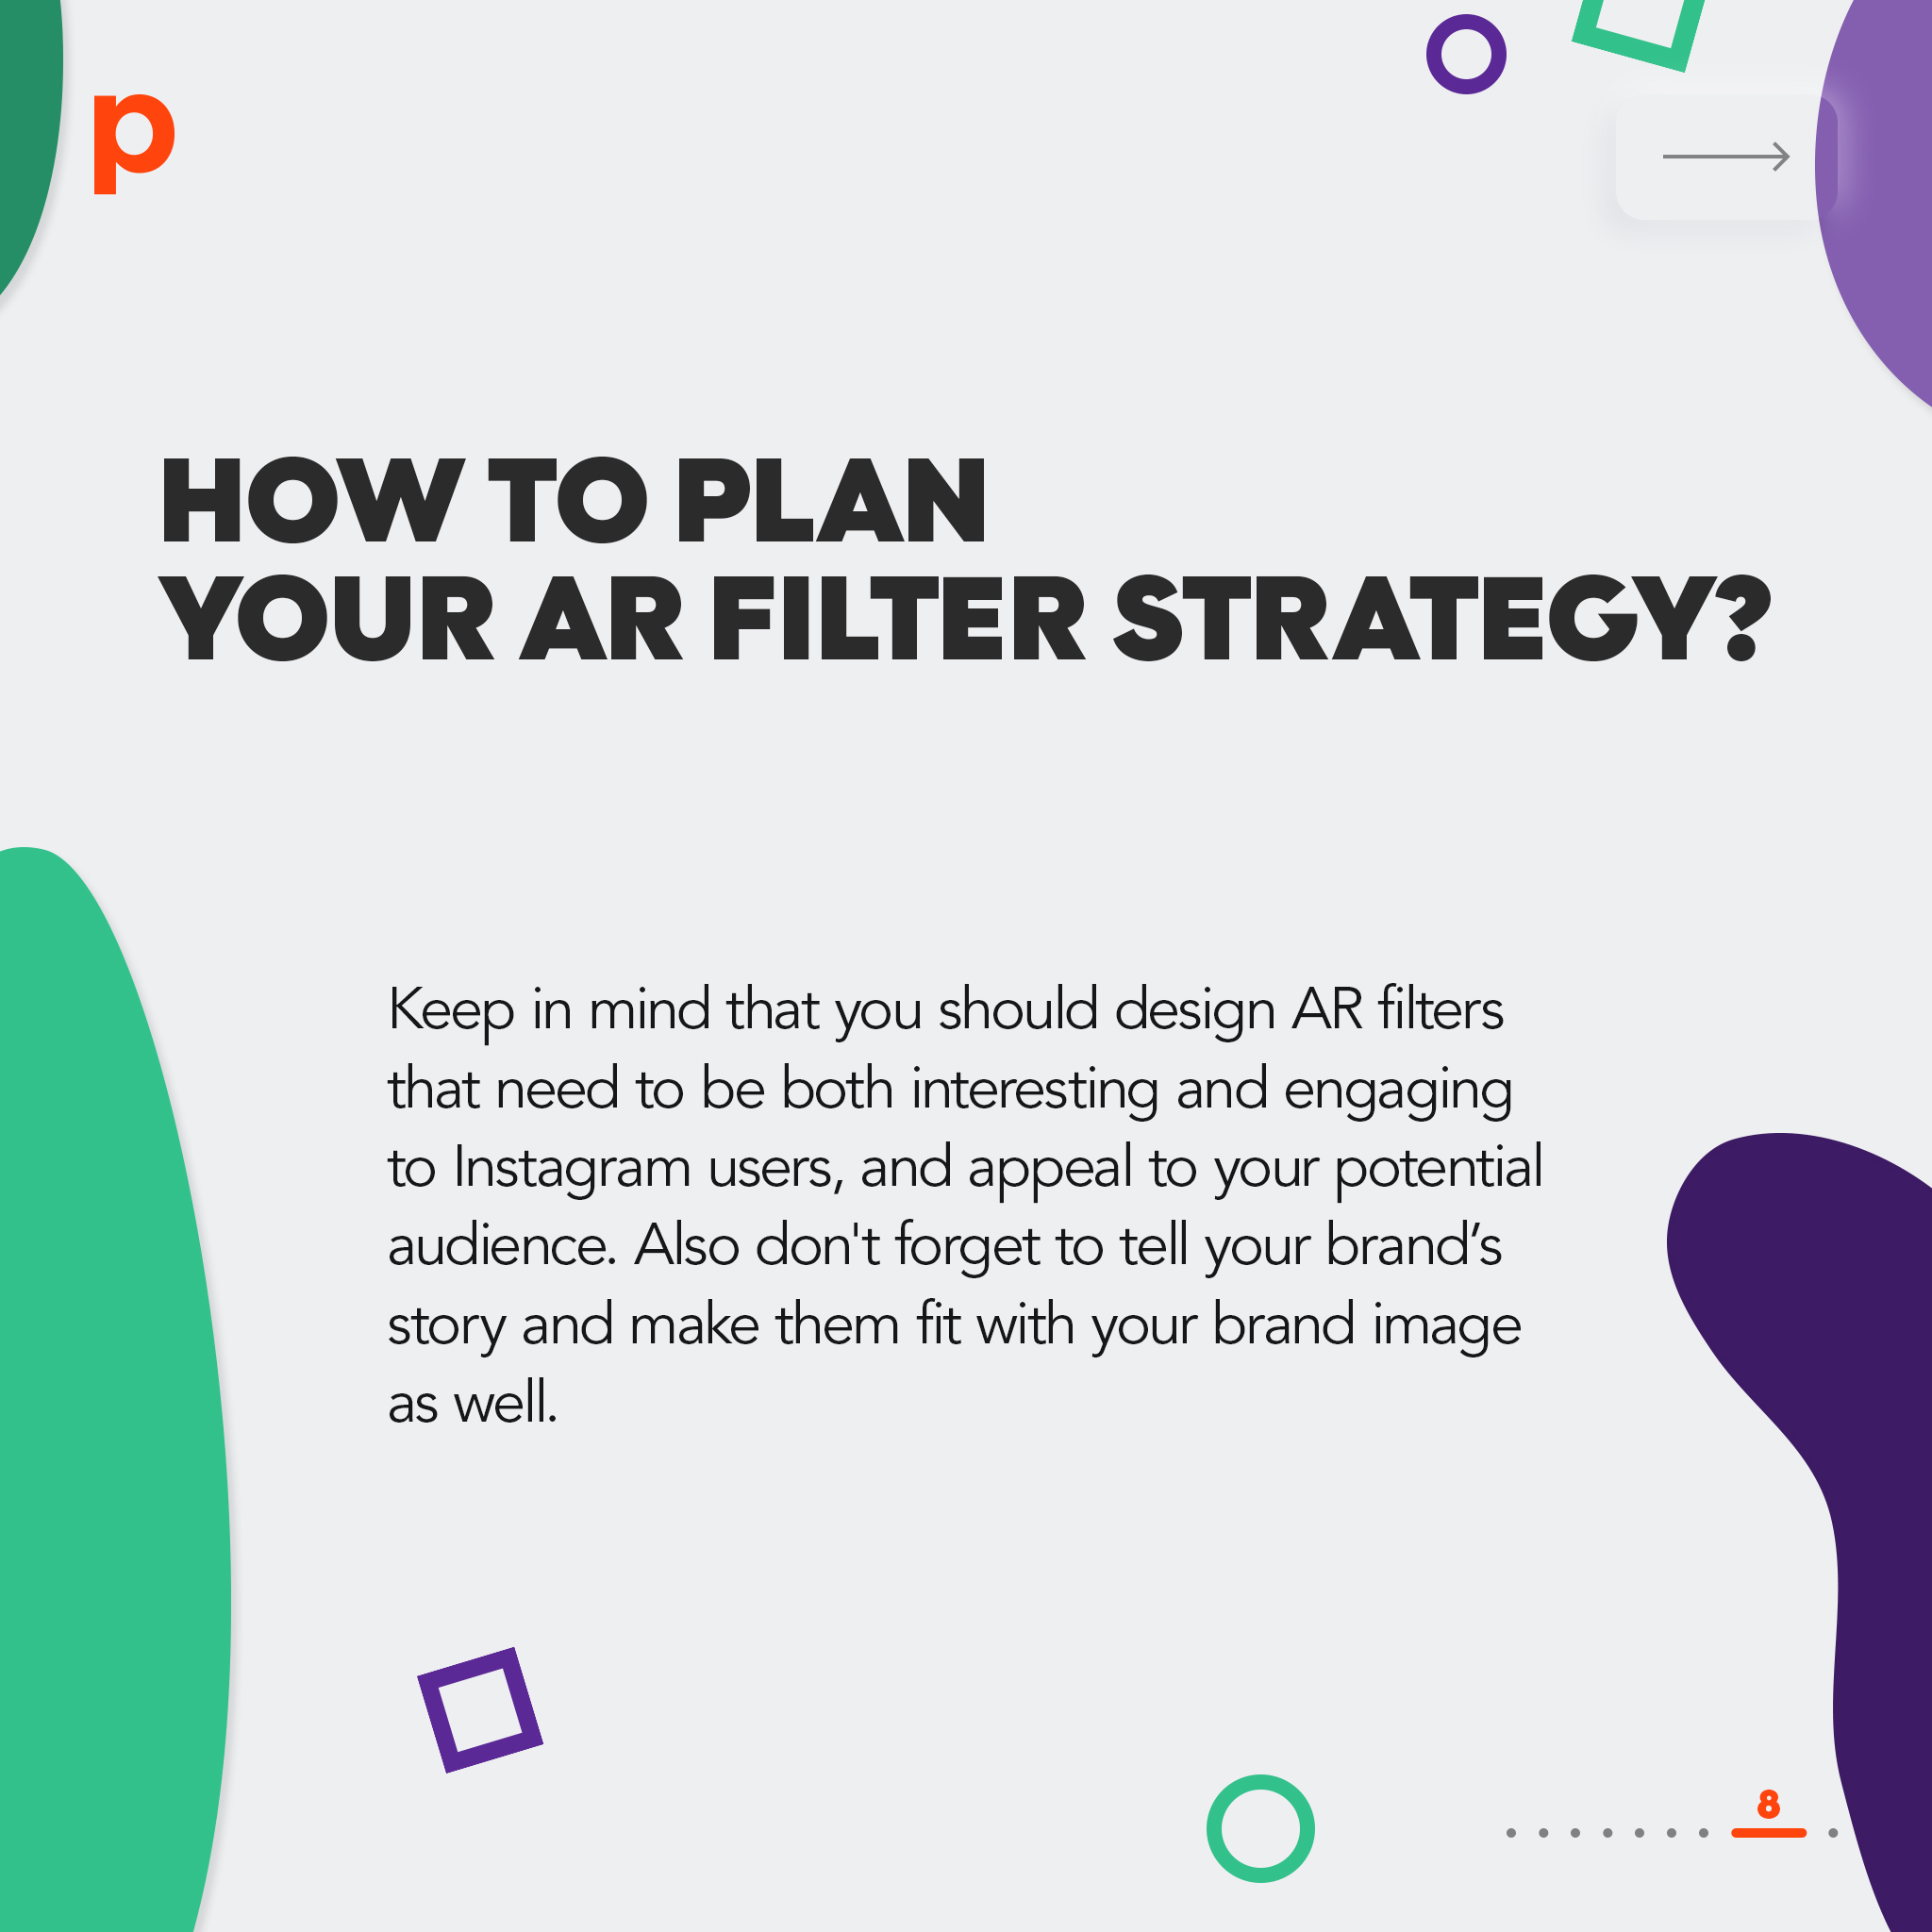 What is AR Filter?, and how to boost your brand awareness and engagement